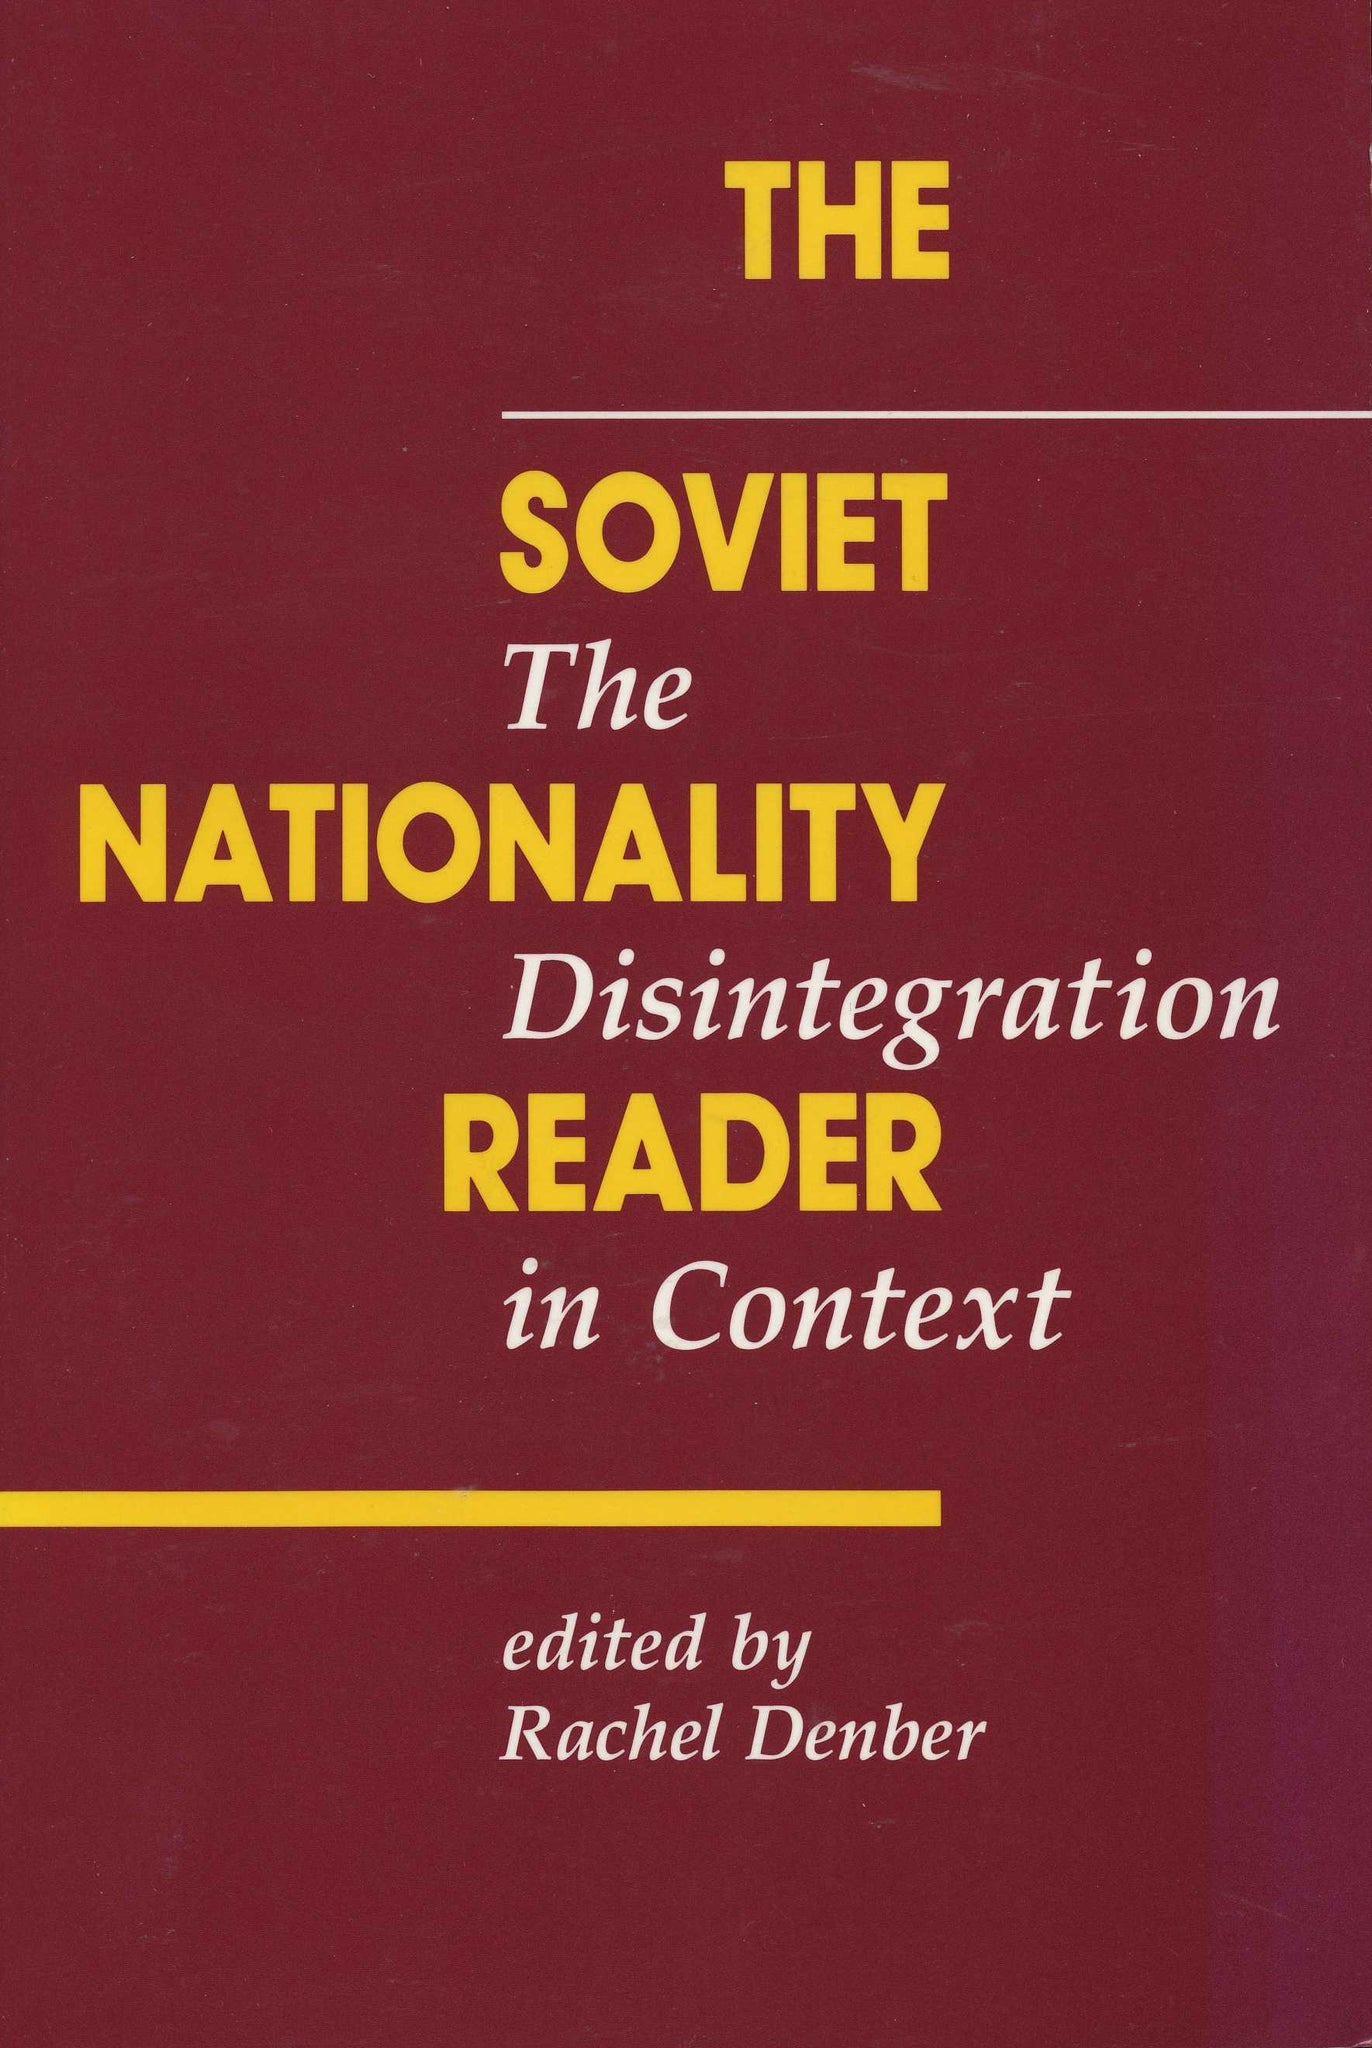 SOVIET NATIONALITY READER: The Disintegration in Context